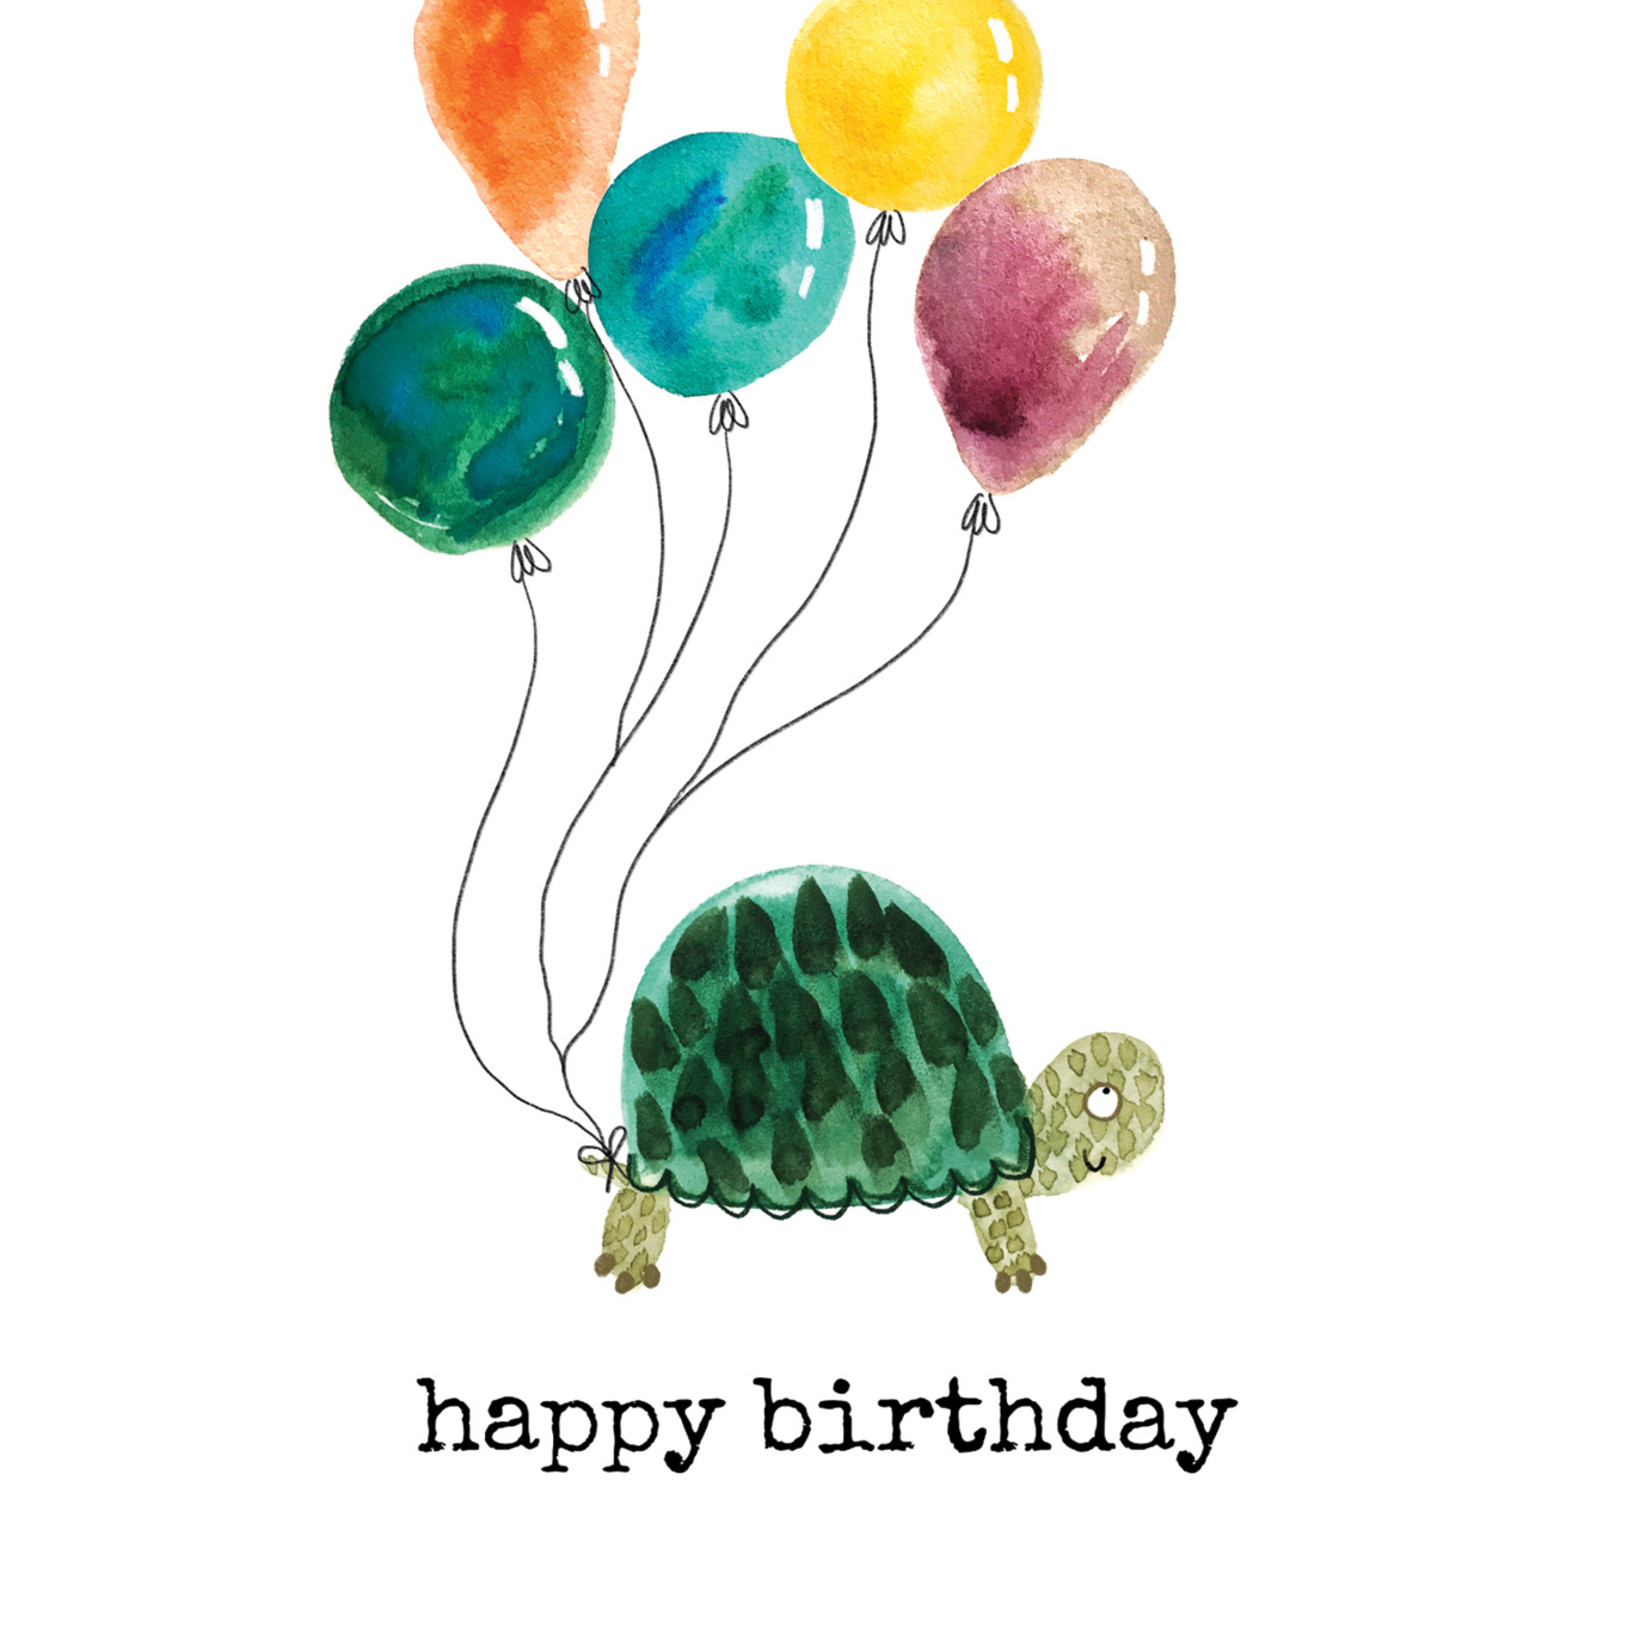 Pictura Pictura - Belated Birthday Card - 61299